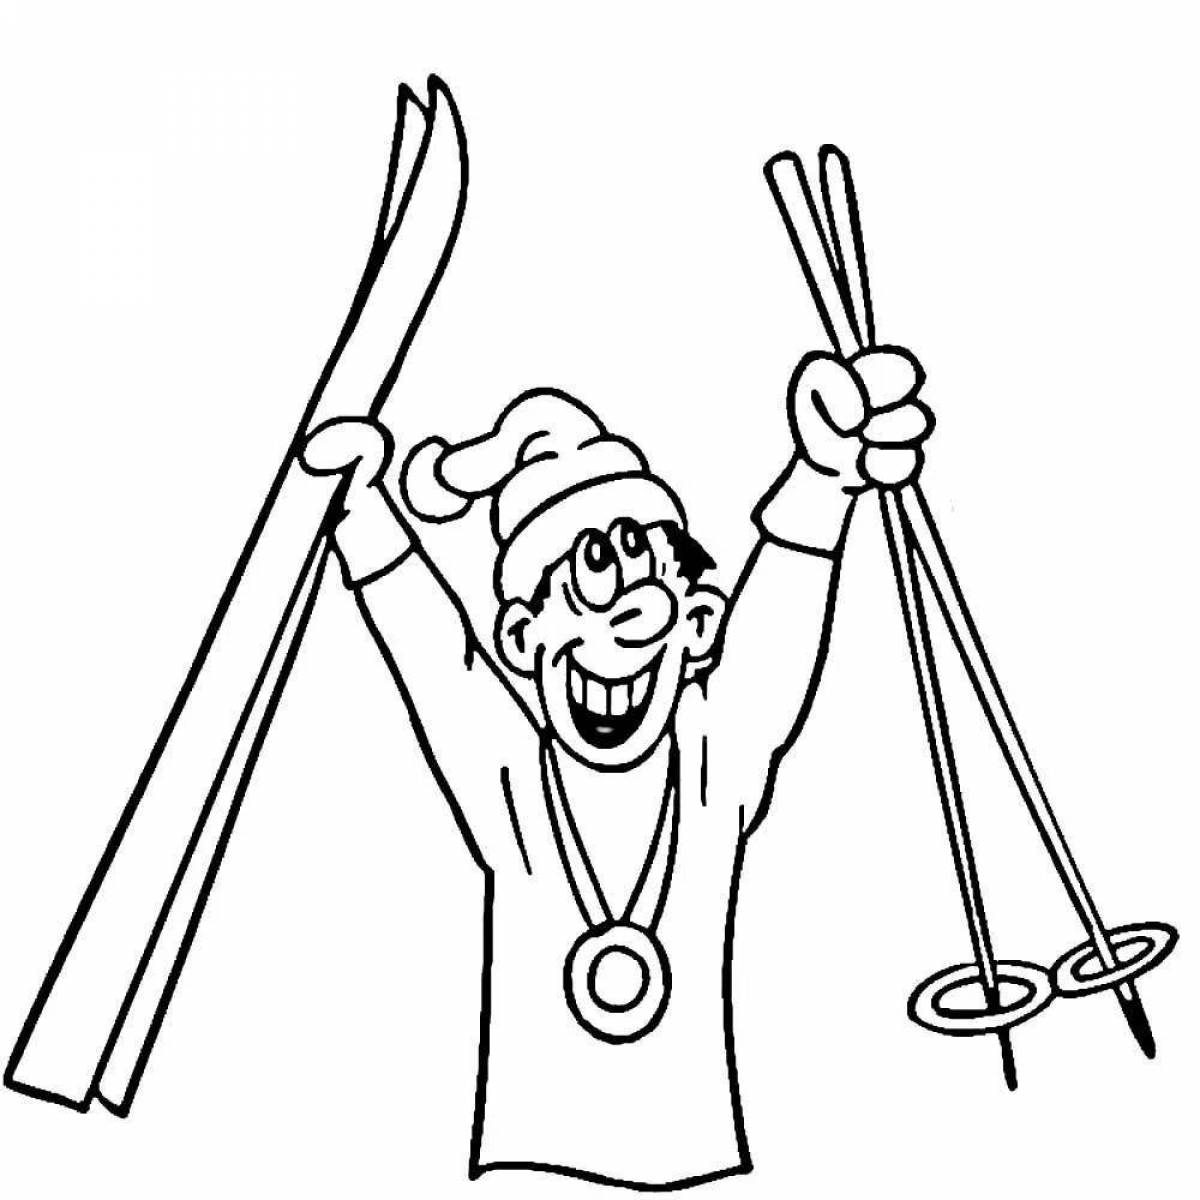 Sparkling skis coloring book